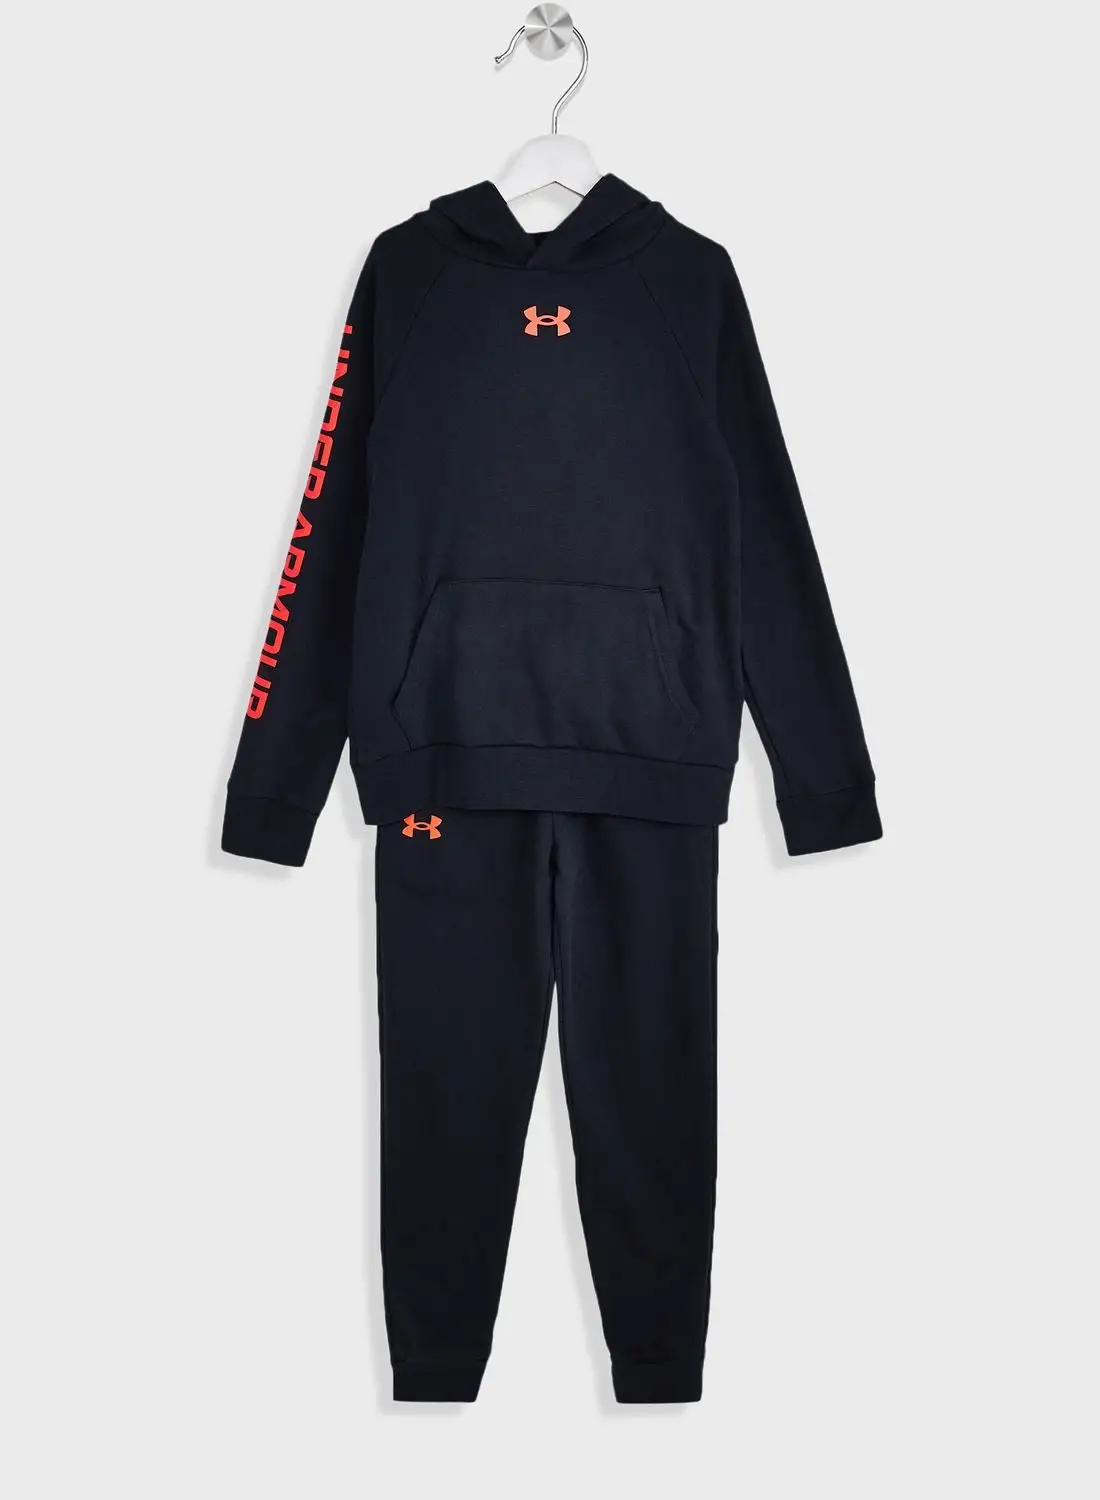 UNDER ARMOUR Youth Rival Fleece Suit